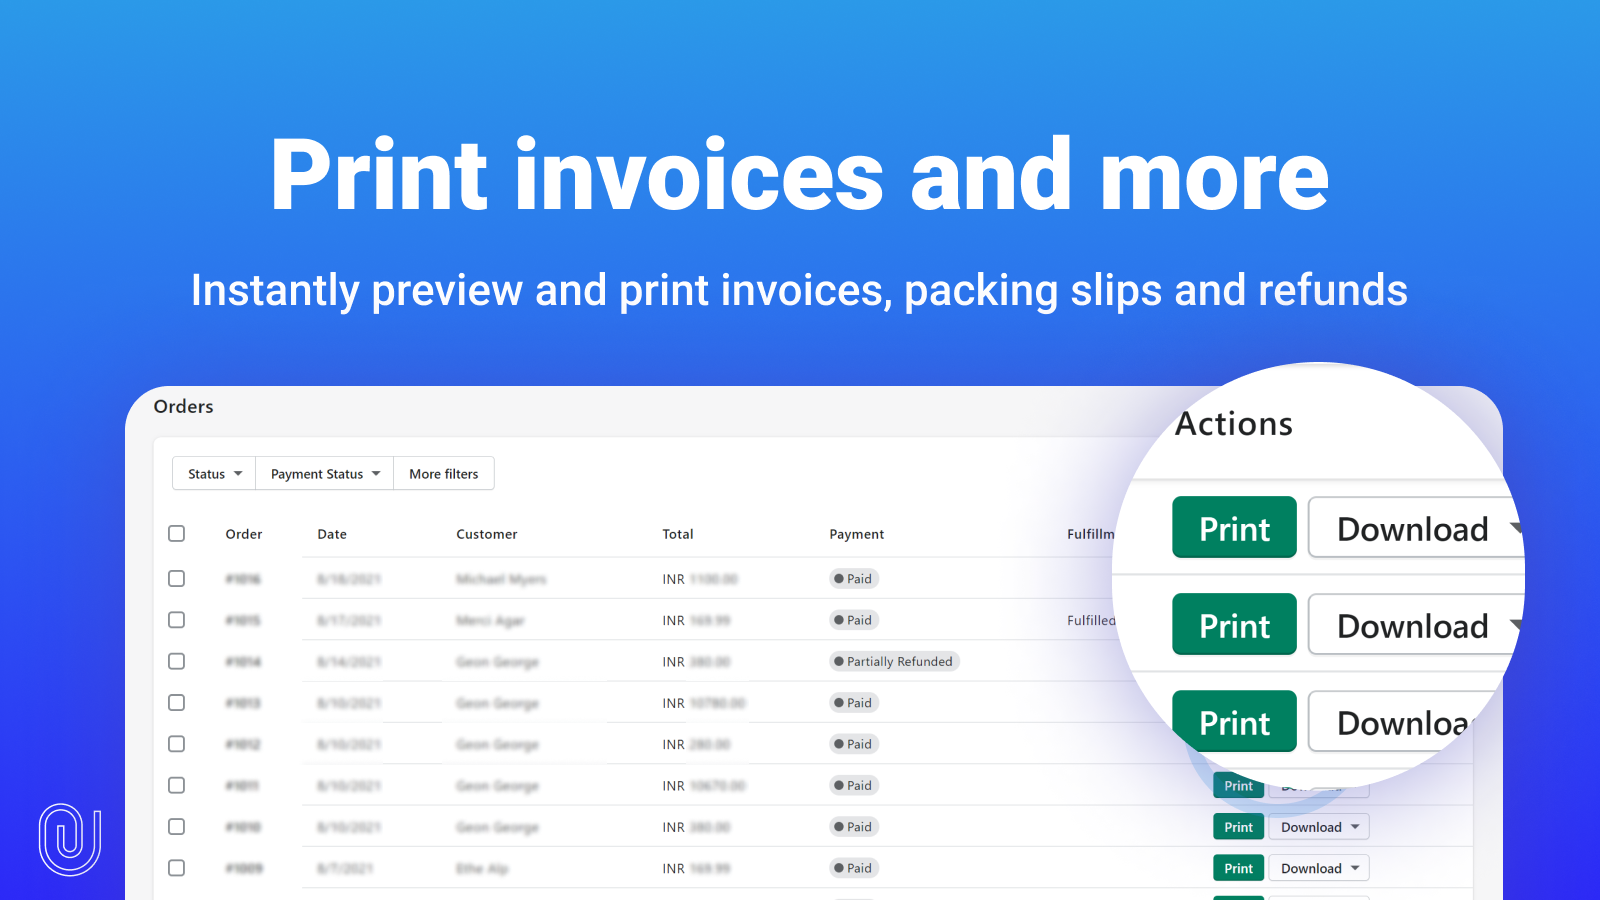 Generate orders and bulk print invoices, packing slips, drafts